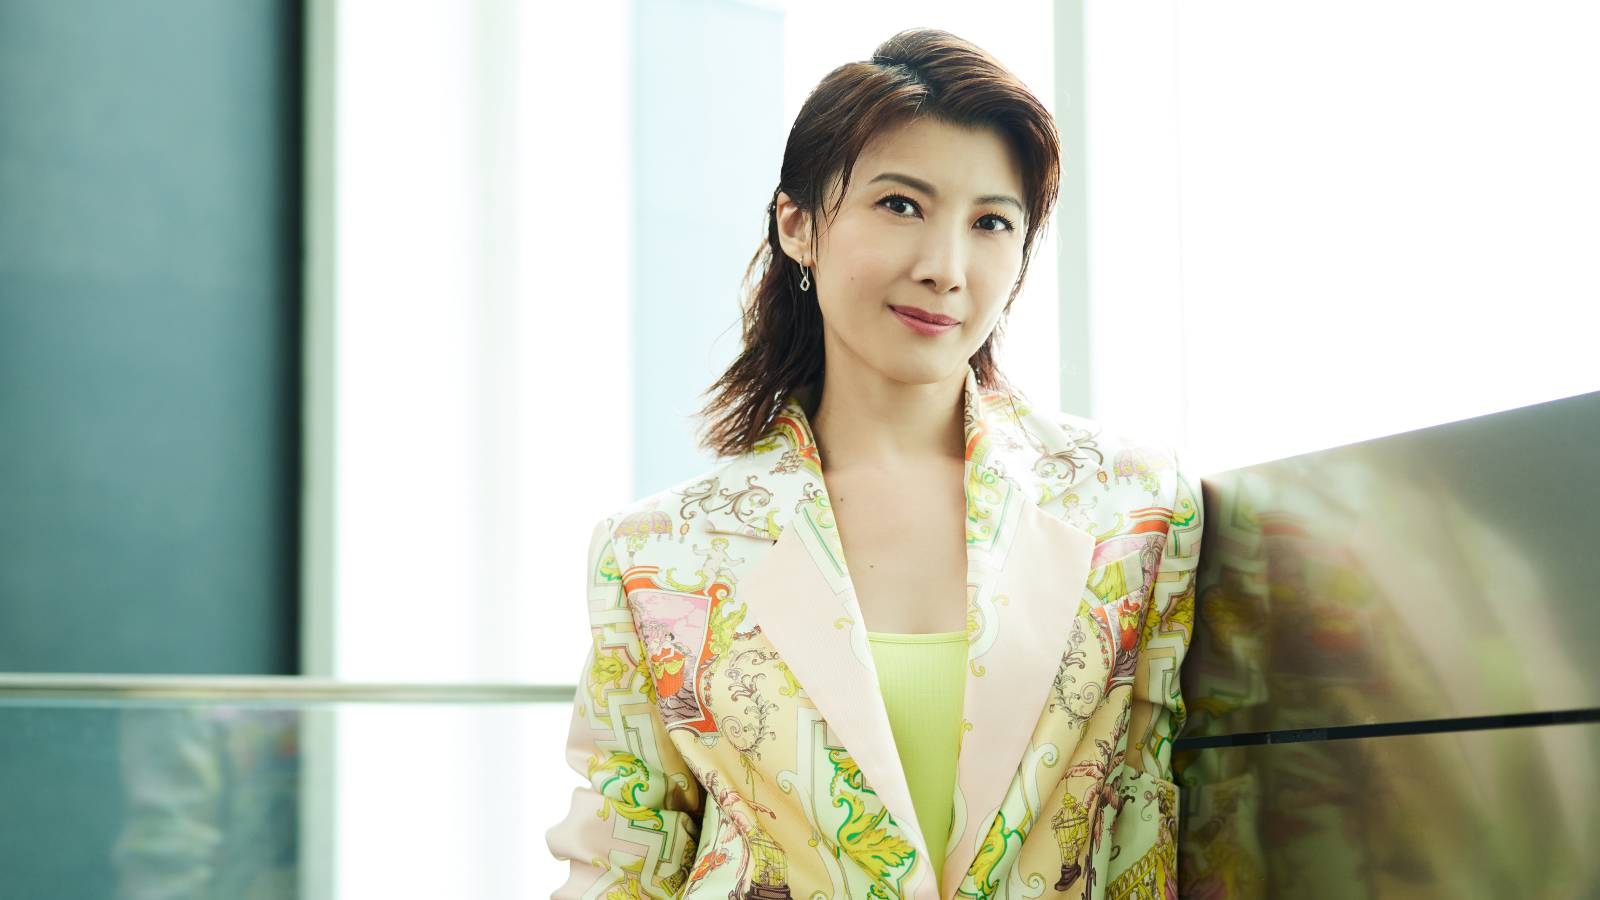 Jeanette Aw On Where Her Pastry Shop Is Located & Why Baking During The Circuit Breaker Was "Frustrating" For Her